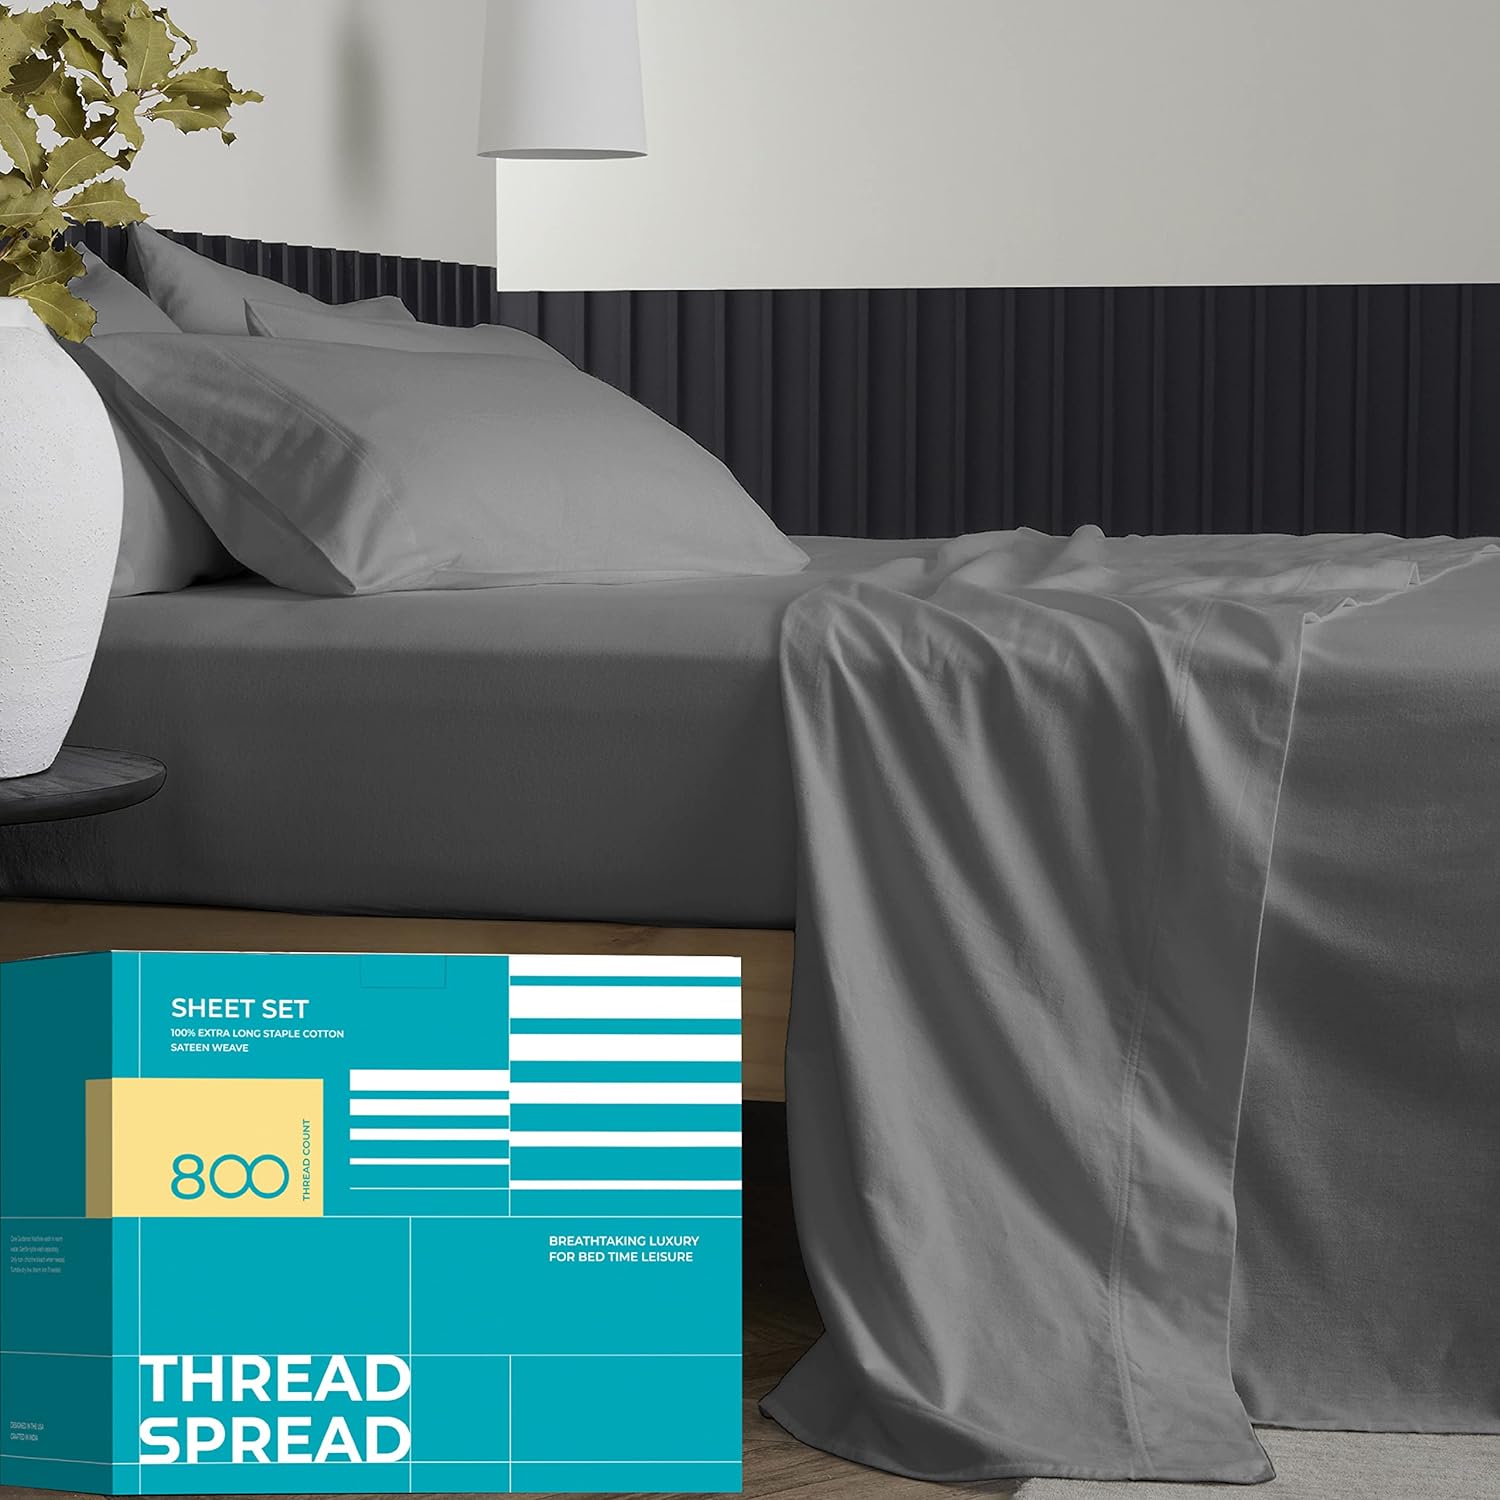 THREAD SPREAD 100% Egyptian Cotton King Bed Sheets - 800 Thread Count 4-Piece King Sheet Set, Sateen Weave Luxury Hotel Sheets, Cooling Bedsheet, 16" Deep Pocket (Fits Upto 18" Mattress) - Dark Gray